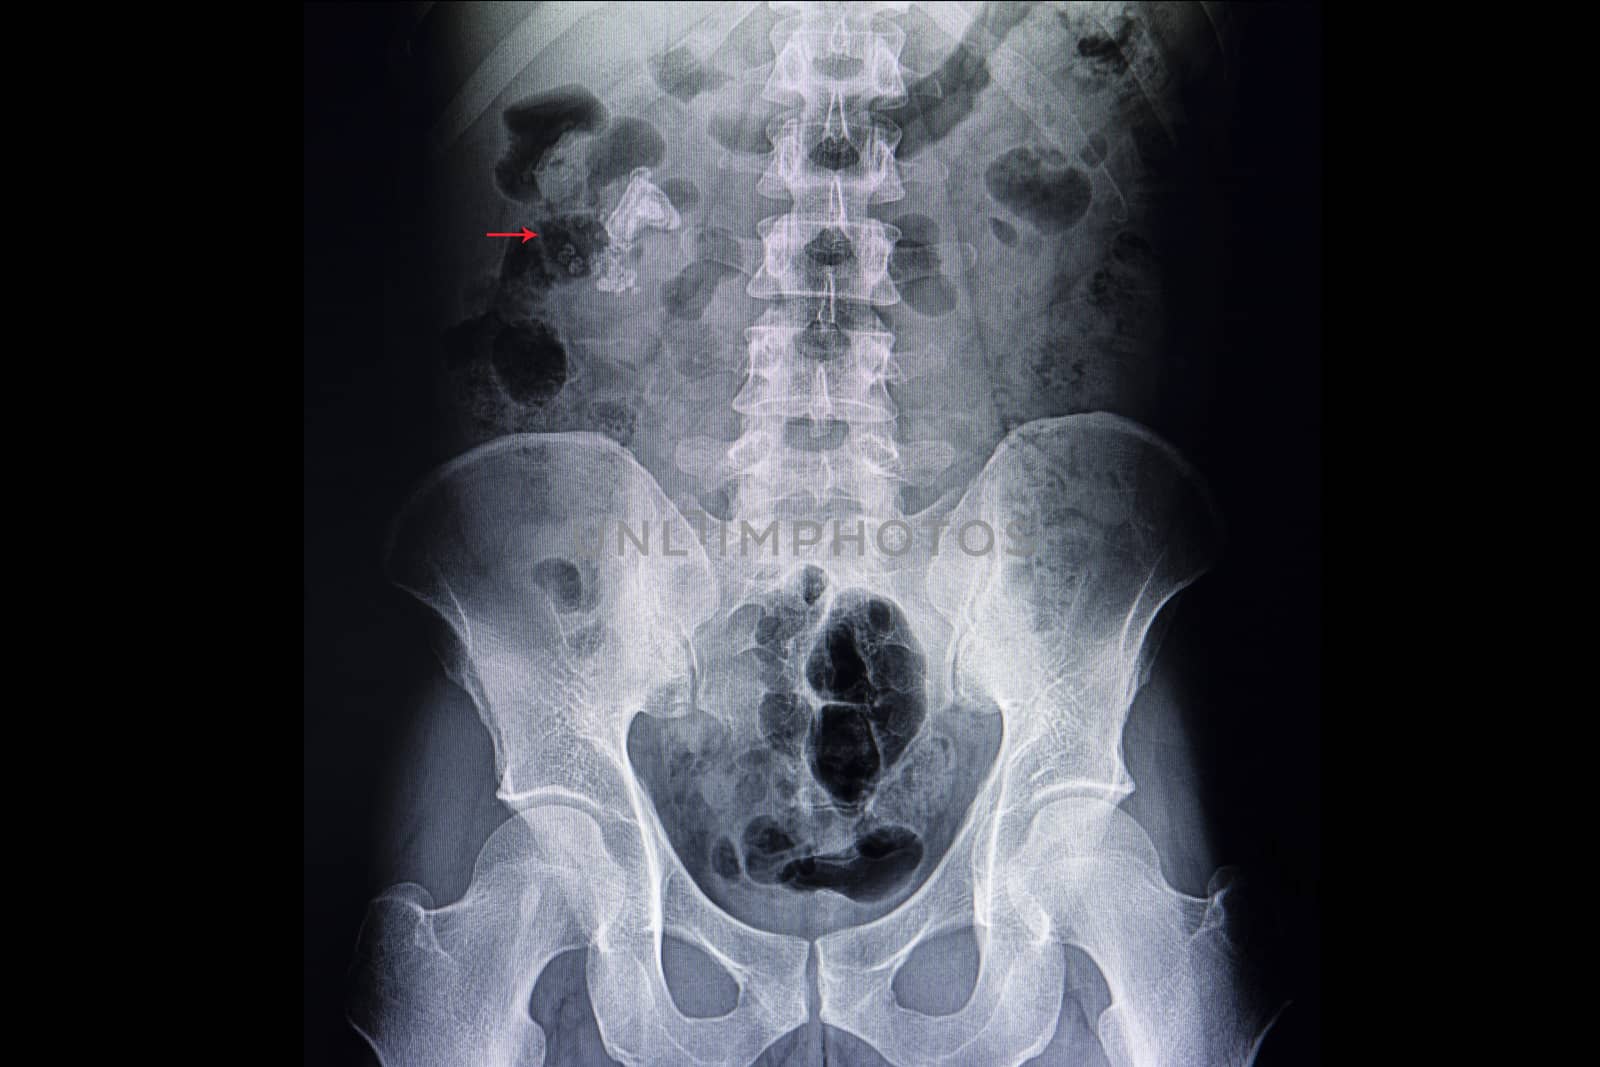 A kidney ureter bladder xray film or KUB film of a patient with large renal calculi or kidney stone in his right kidney. A case of abnormal x ray.